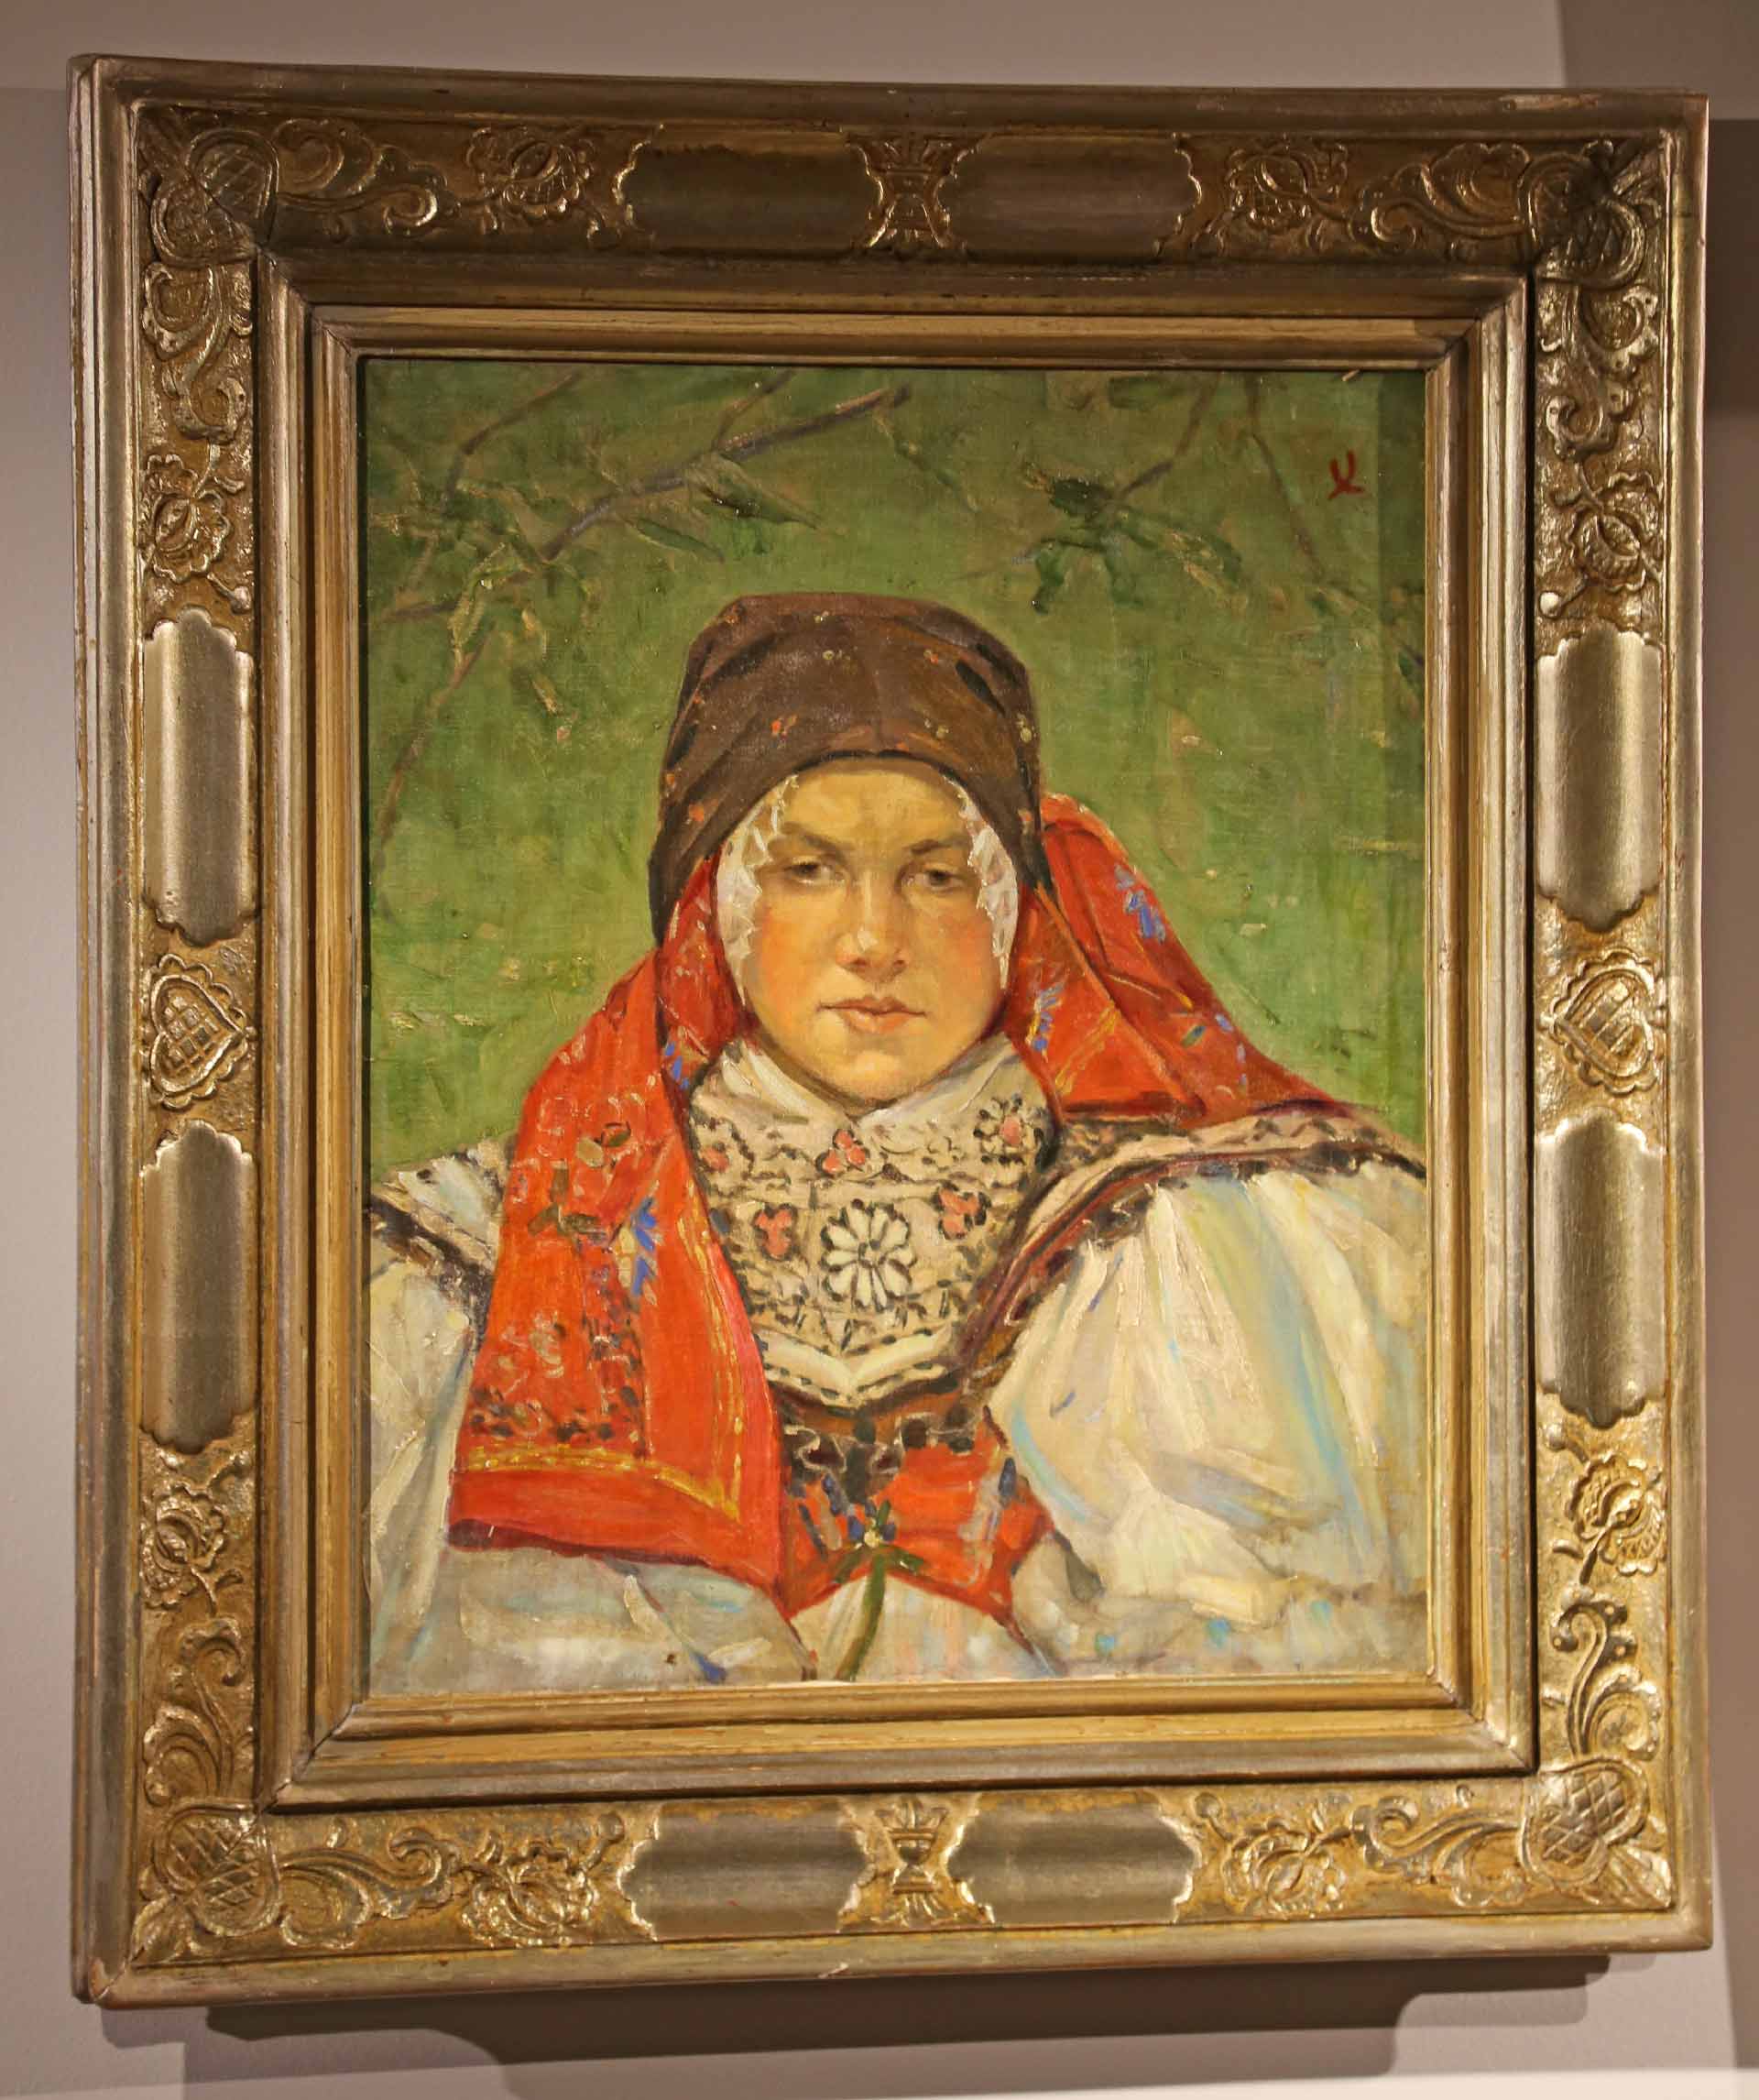 painting of a woman a head covering and the same orange head covering as well